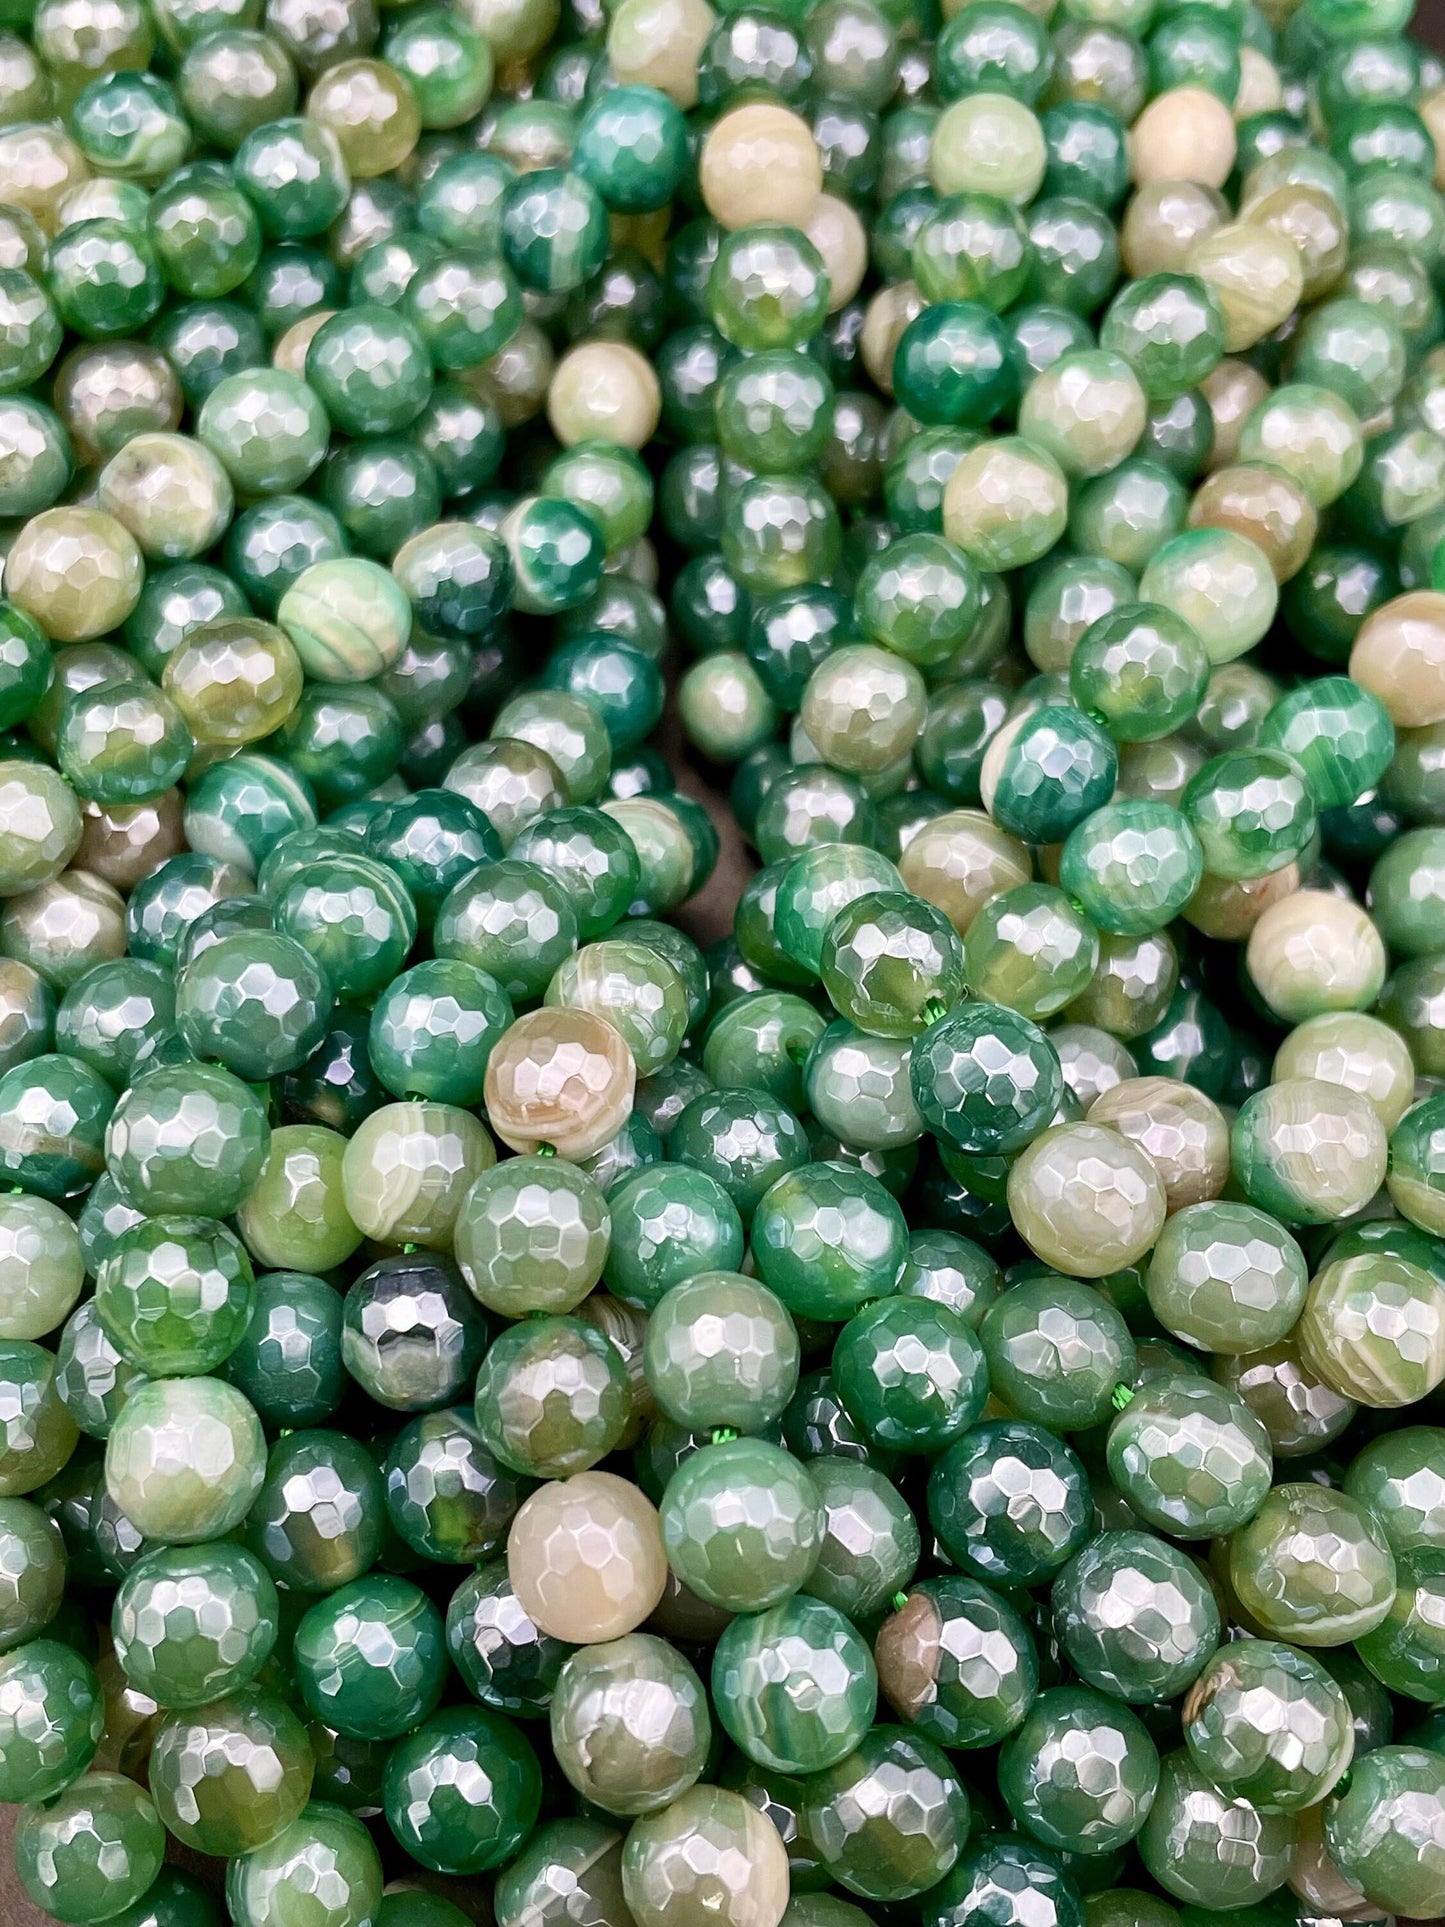 Beautiful Mystic Agate Gemstone Bead Faceted 6mm 8mm 10mm 12mm Round Beads, Beautiful Green Color Agate Gemstone Bead